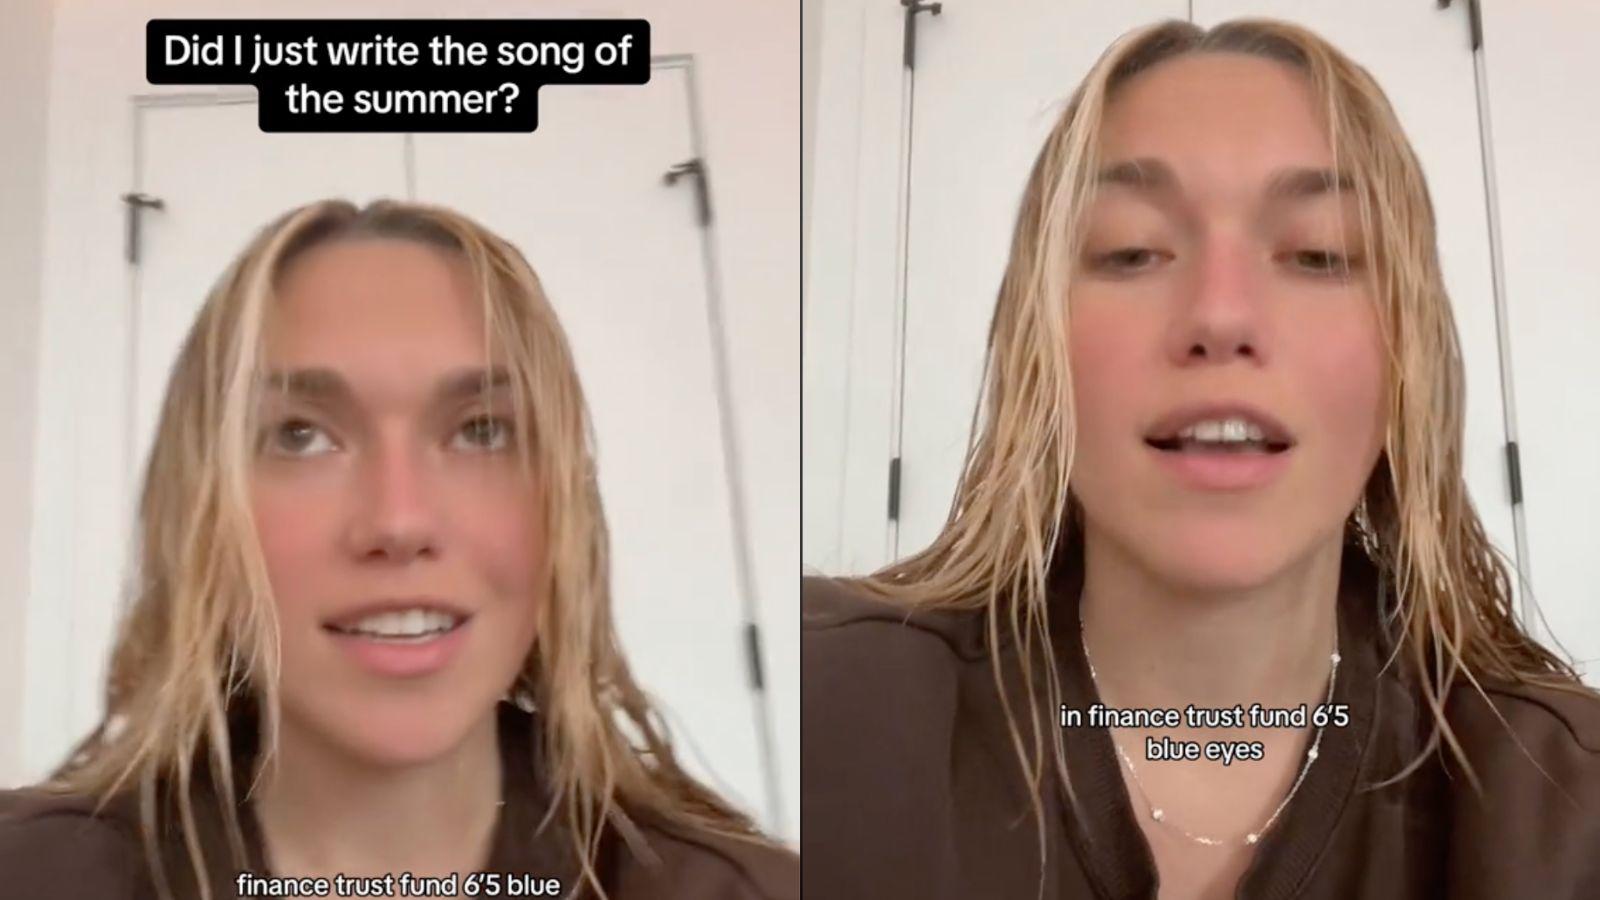 A woman has gone viral on TikTok with a new sound